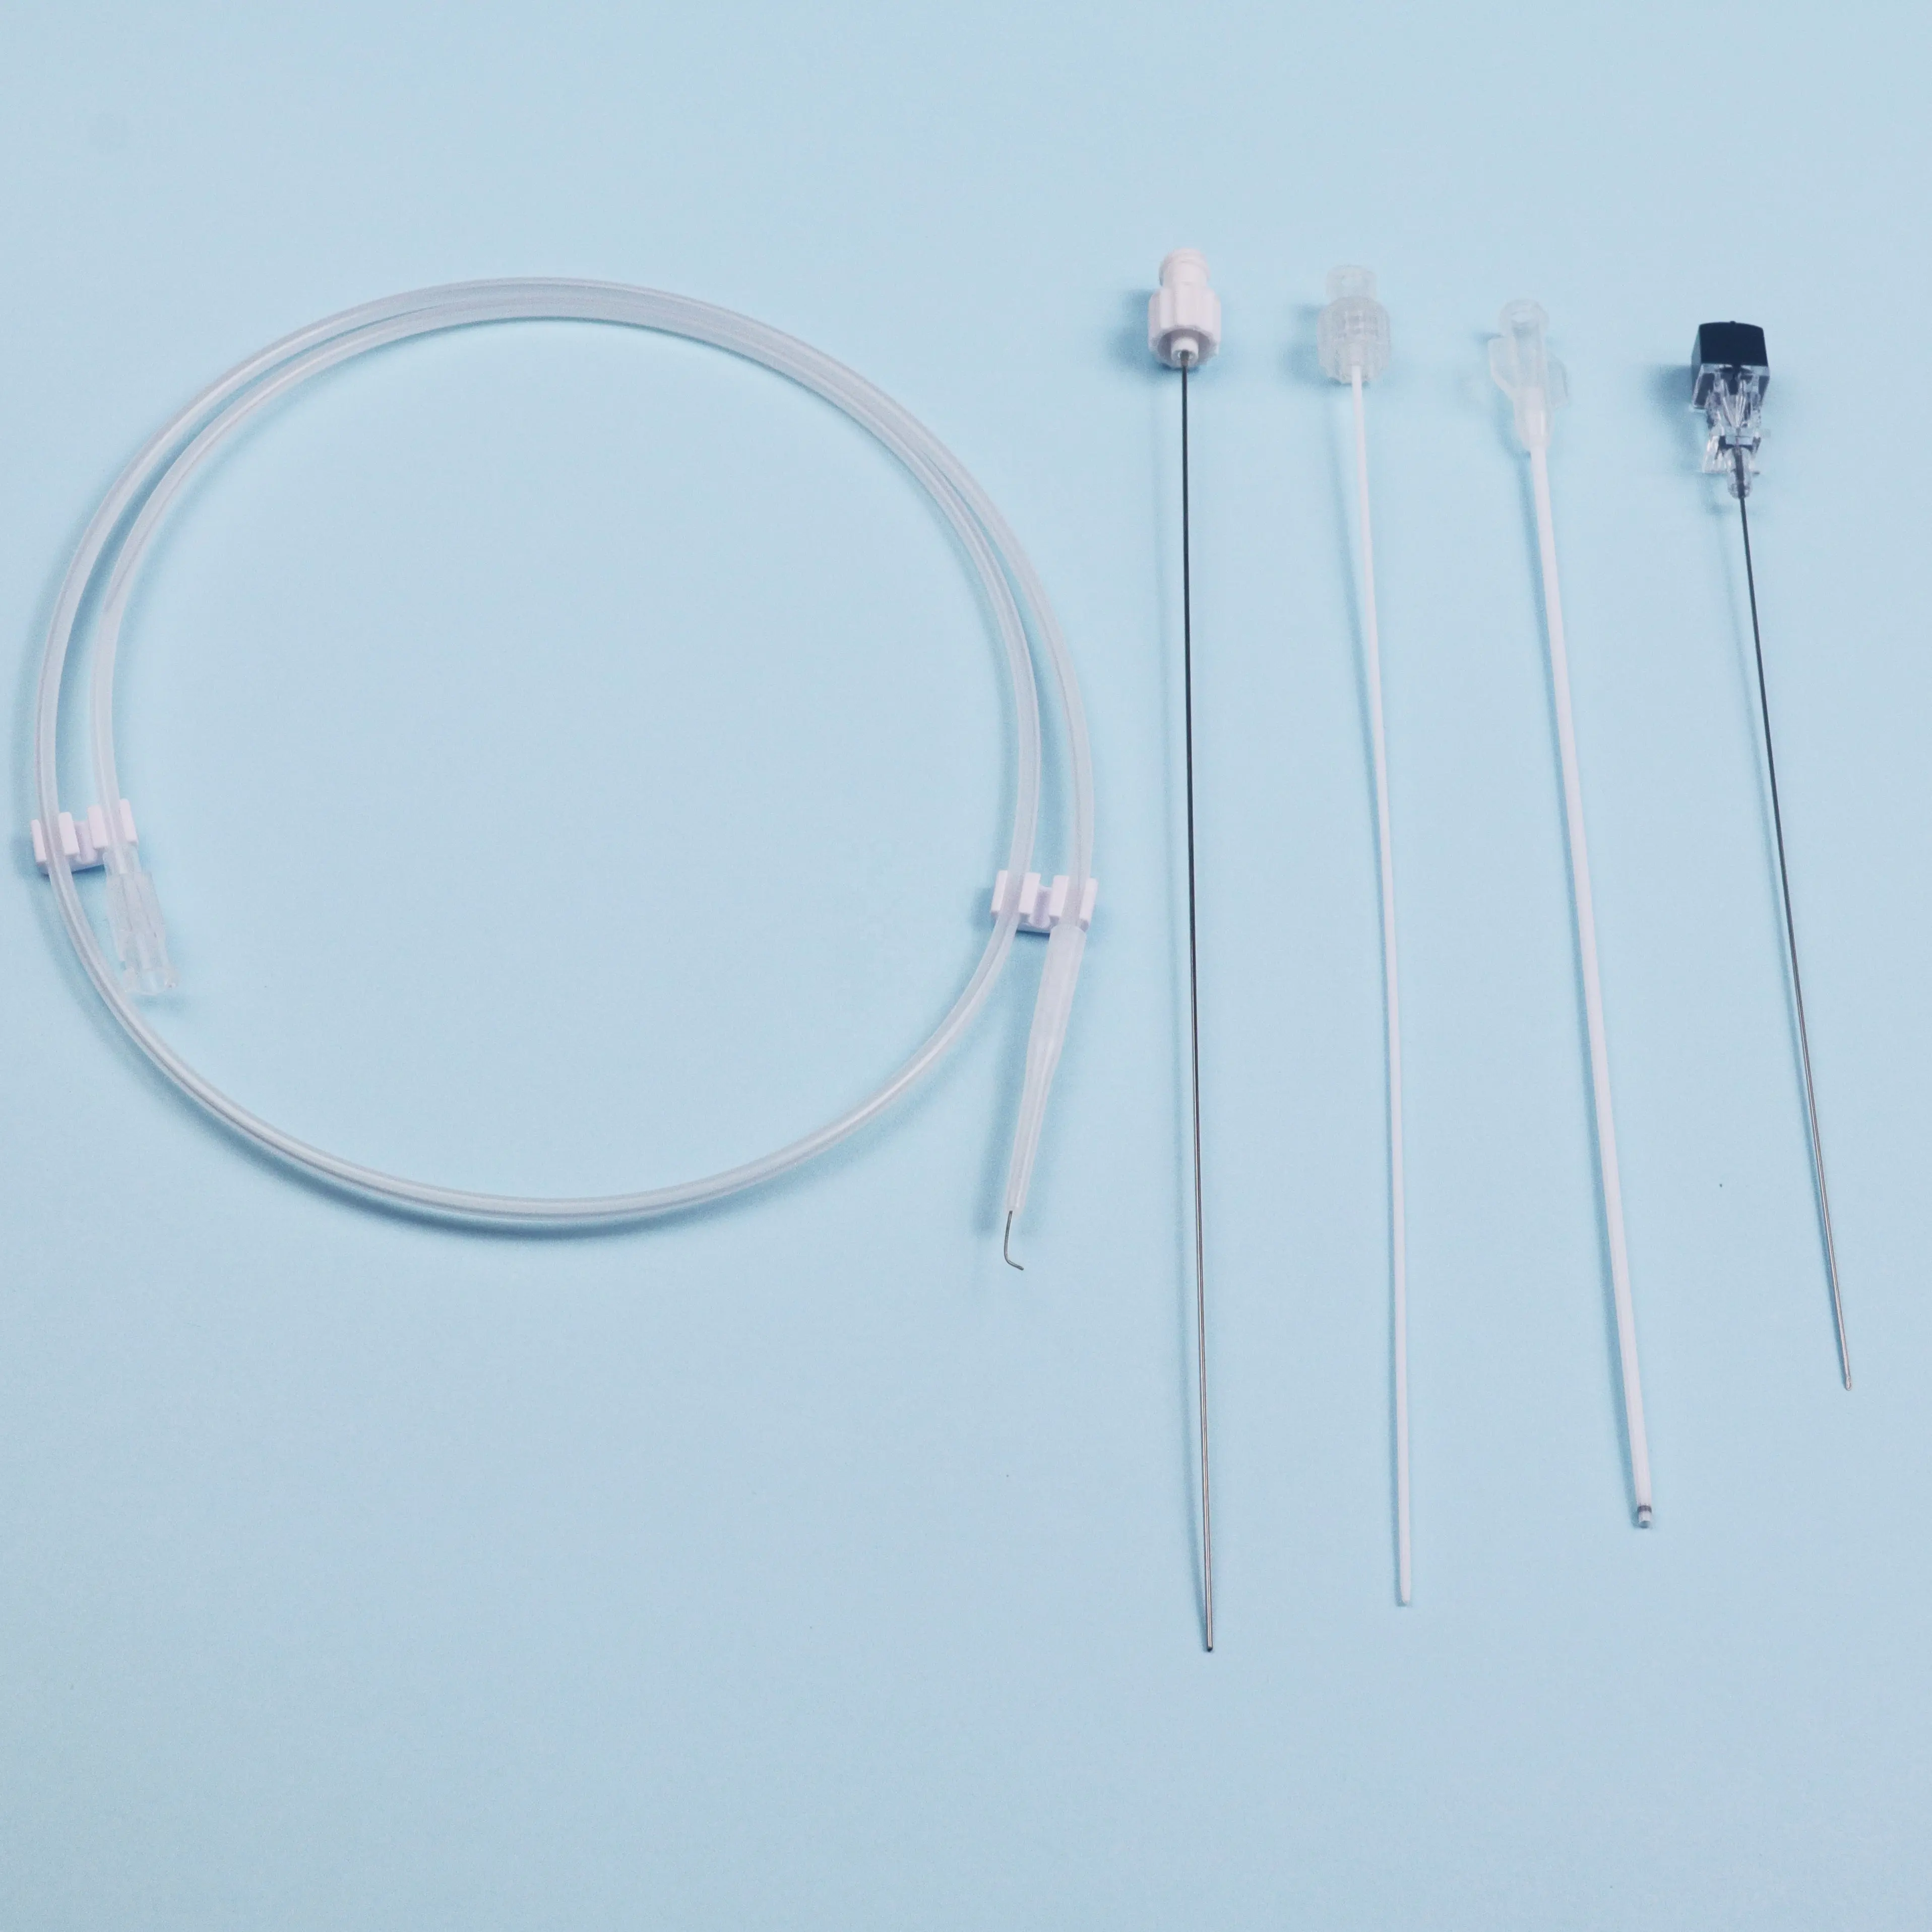 Tianck medical disposable urology clinical surgical non hydrophilic nonvascular introducer set